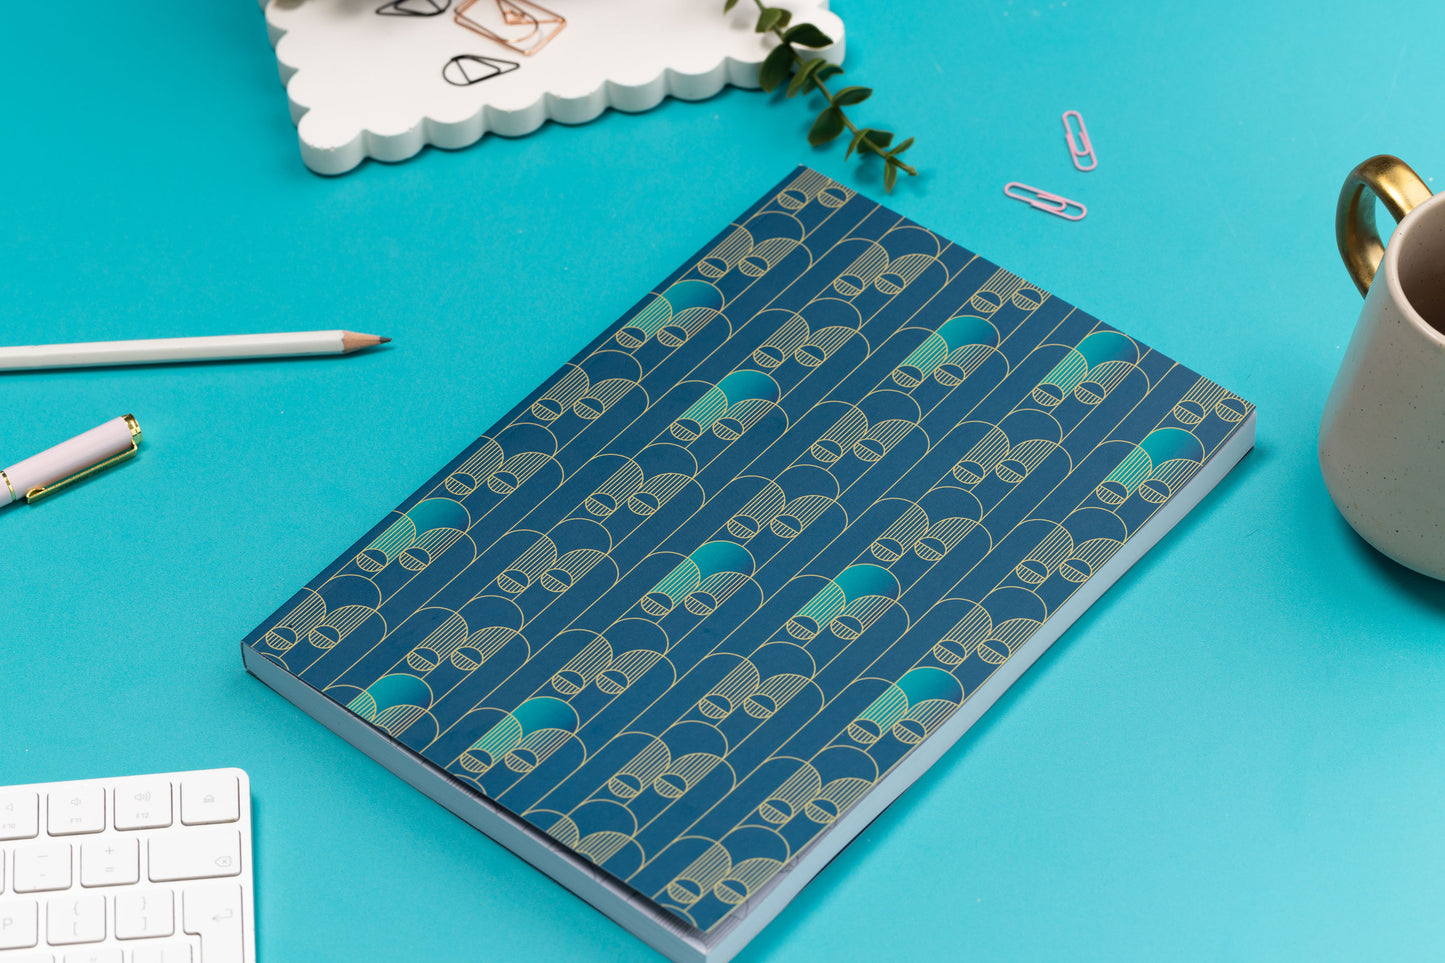 The Deco Delights B5 Notebook is facing up on a teal desk with pens and paperclips scattered around it, a white keyboard and a mug. 